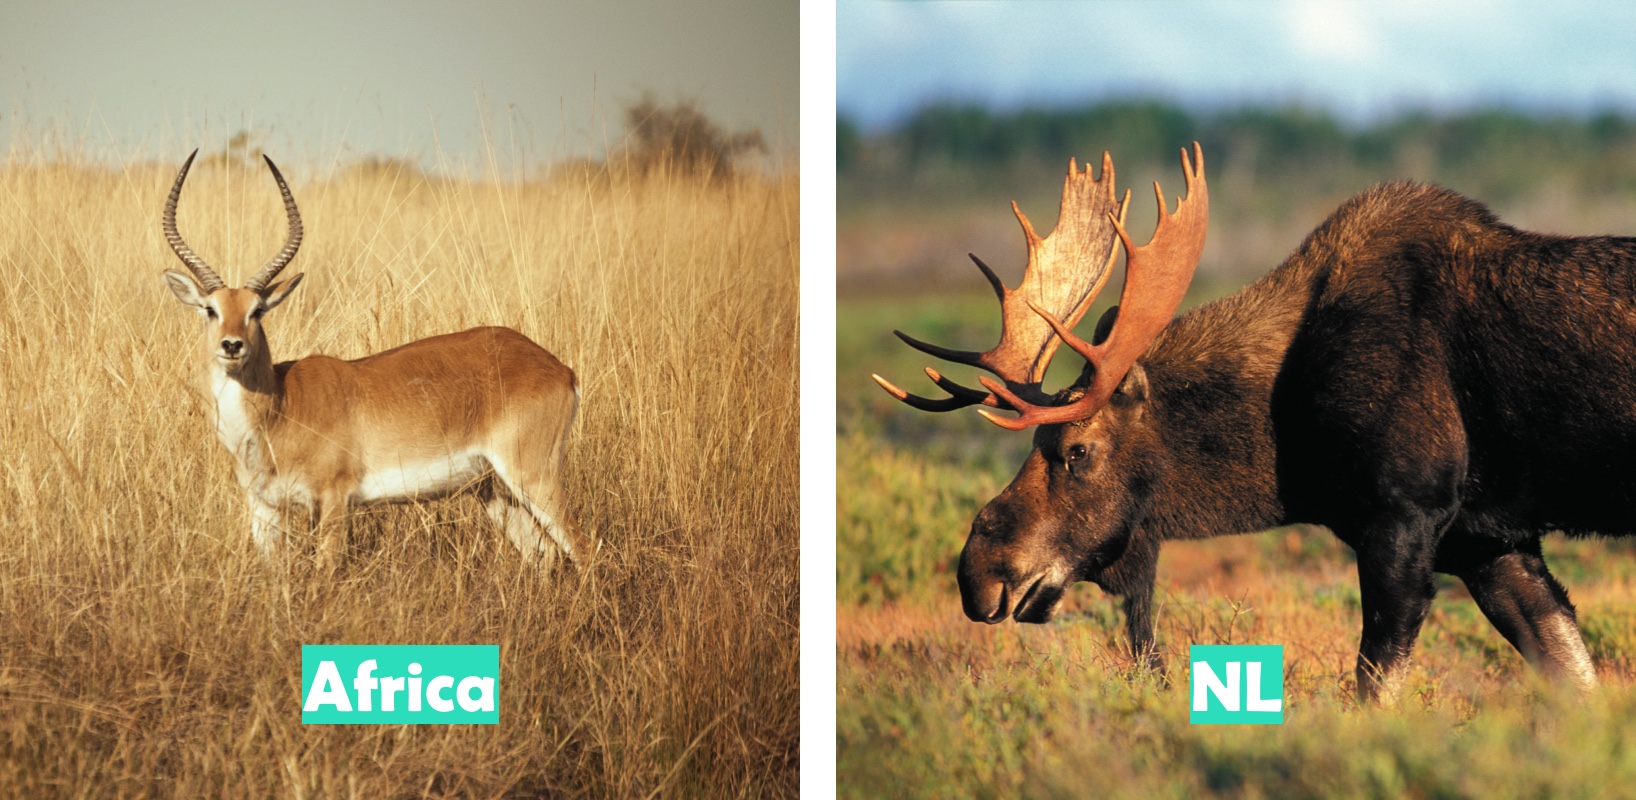 Africa (Antelope pictured) vs Newfoundland & Labrador (Moose pictured)